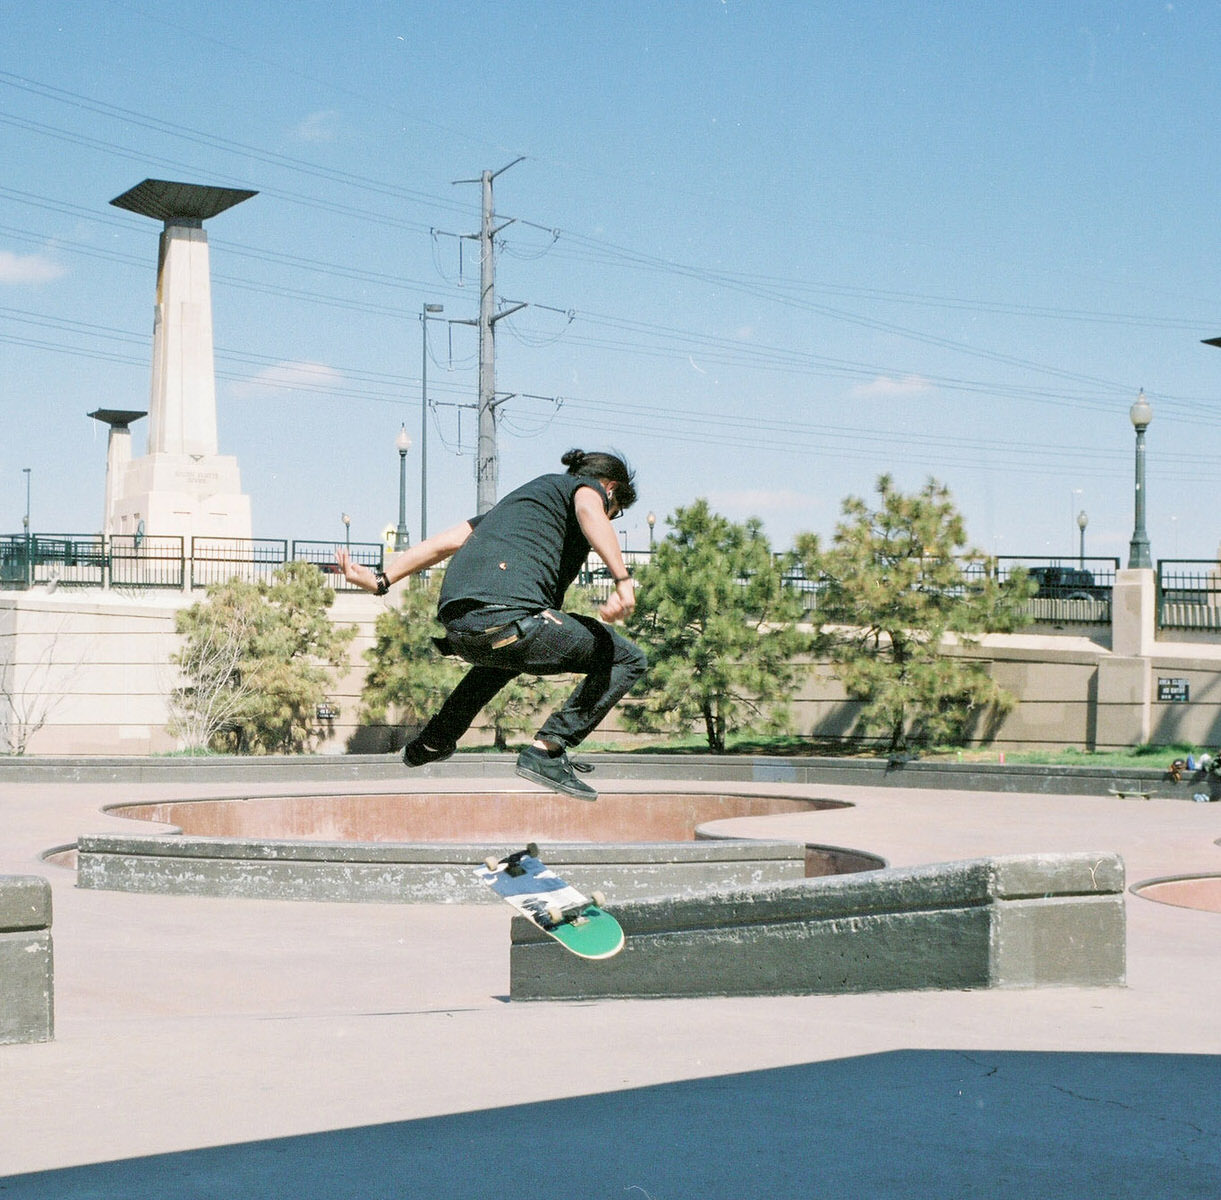  Expired film, but captured some really cool moments from the skate park that surpass any technical issues. 